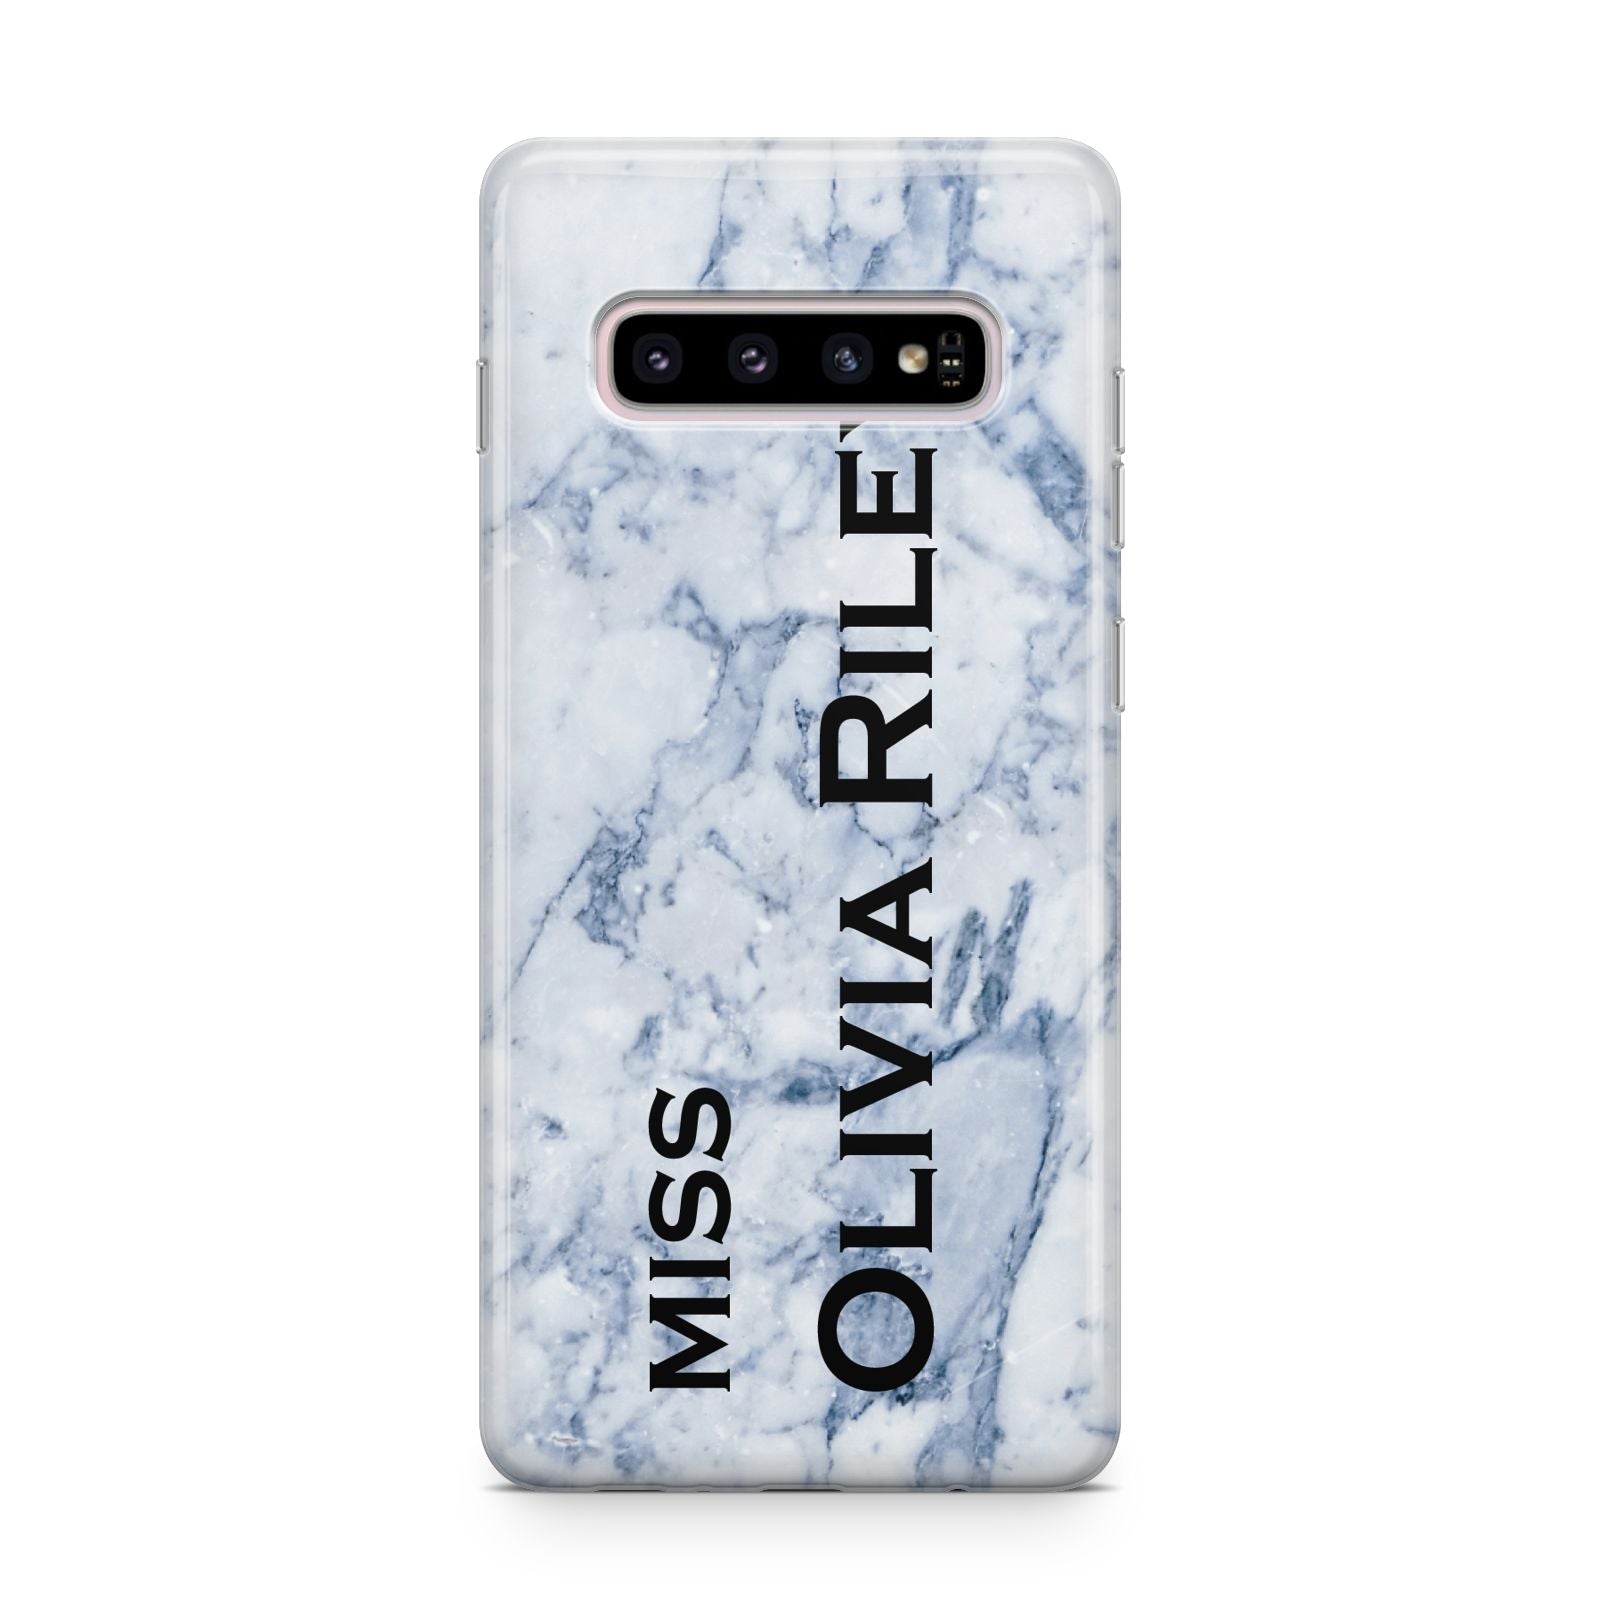 Full Name Grey Marble Samsung Galaxy S10 Plus Case